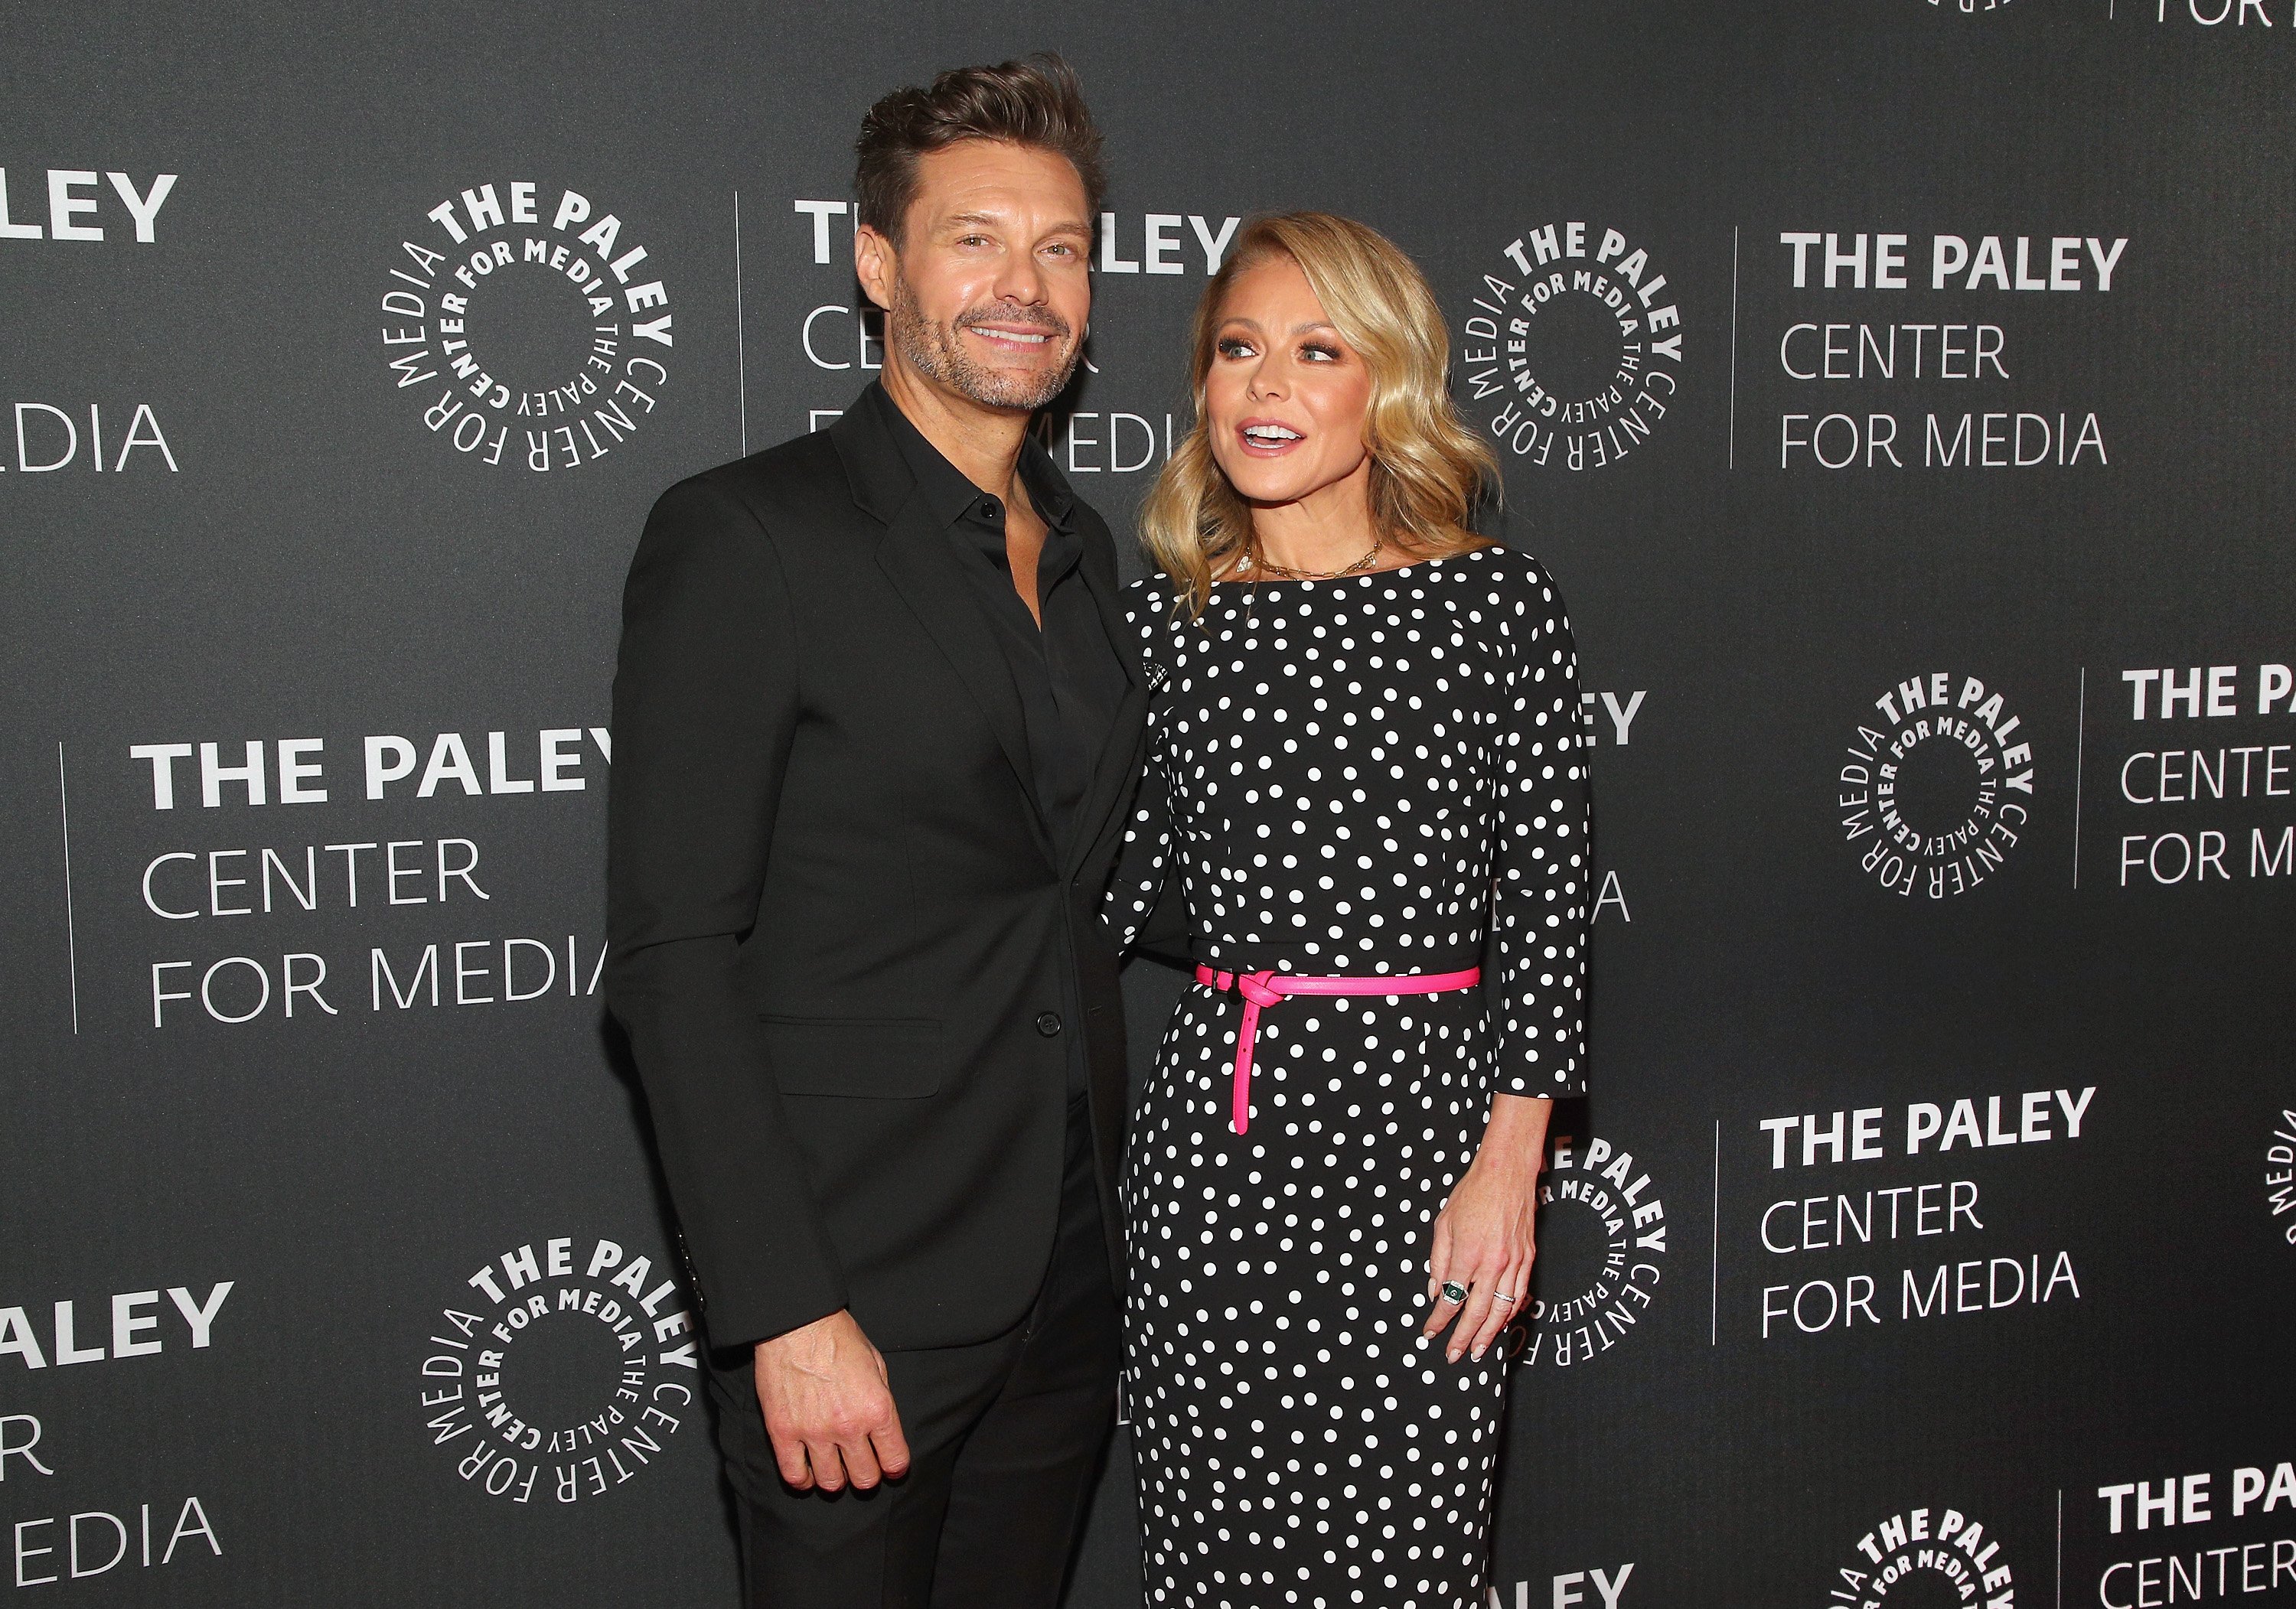 Ryan Seacrest and Kelly Ripa at Paley Center For Media on March 04, 2020, in New York City. | Source: Getty Images.